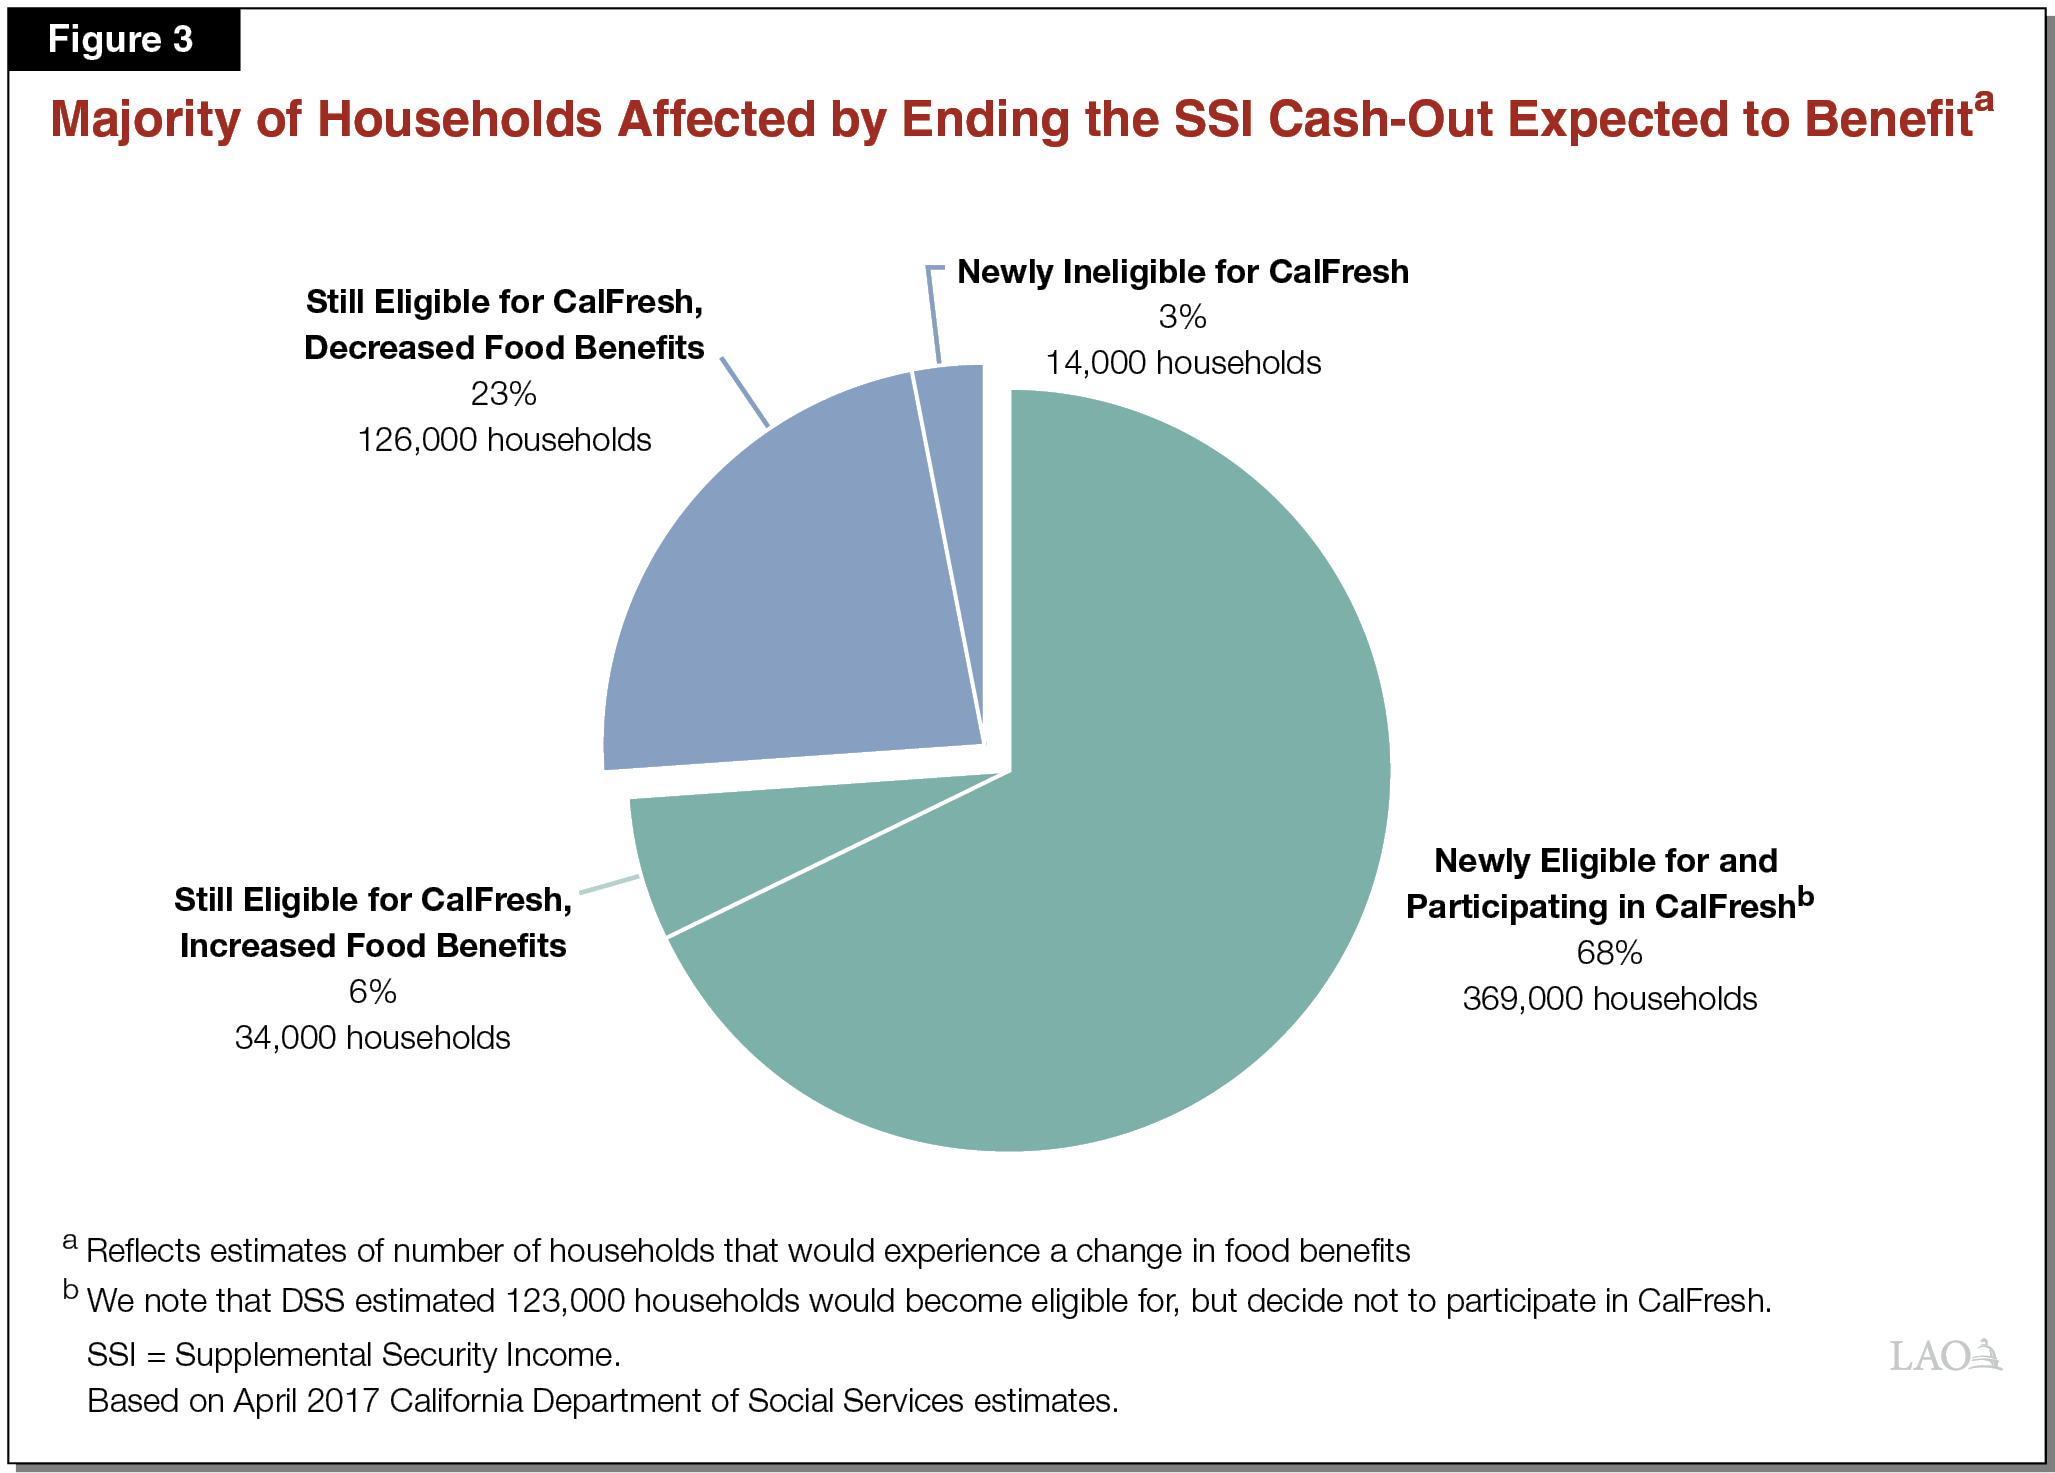 Majority of Households Expected to Benefit From Ending the SSI Cash-Out